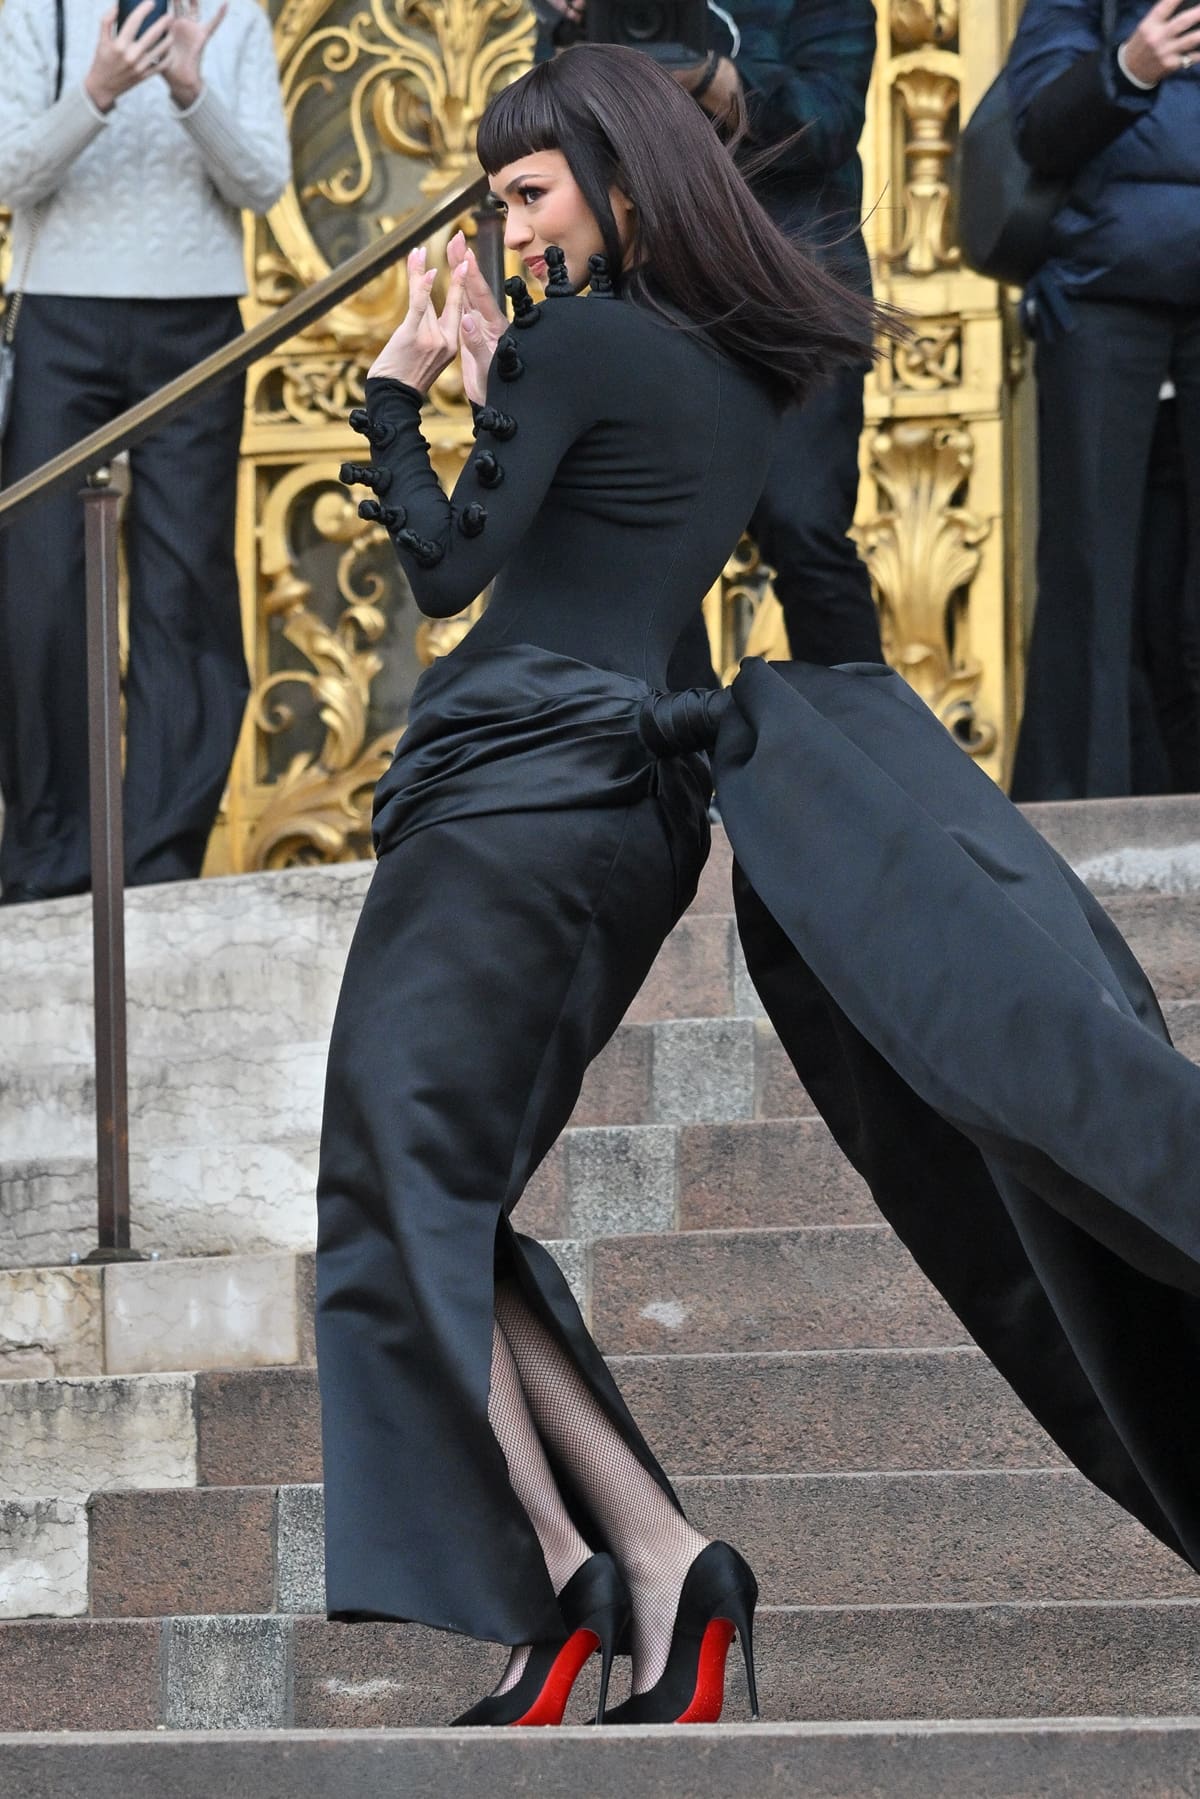 Zendaya ascended the grand steps of Place Vendôme, her ruched black satin skirt flowing majestically with each step, embodying the epitome of modern elegance